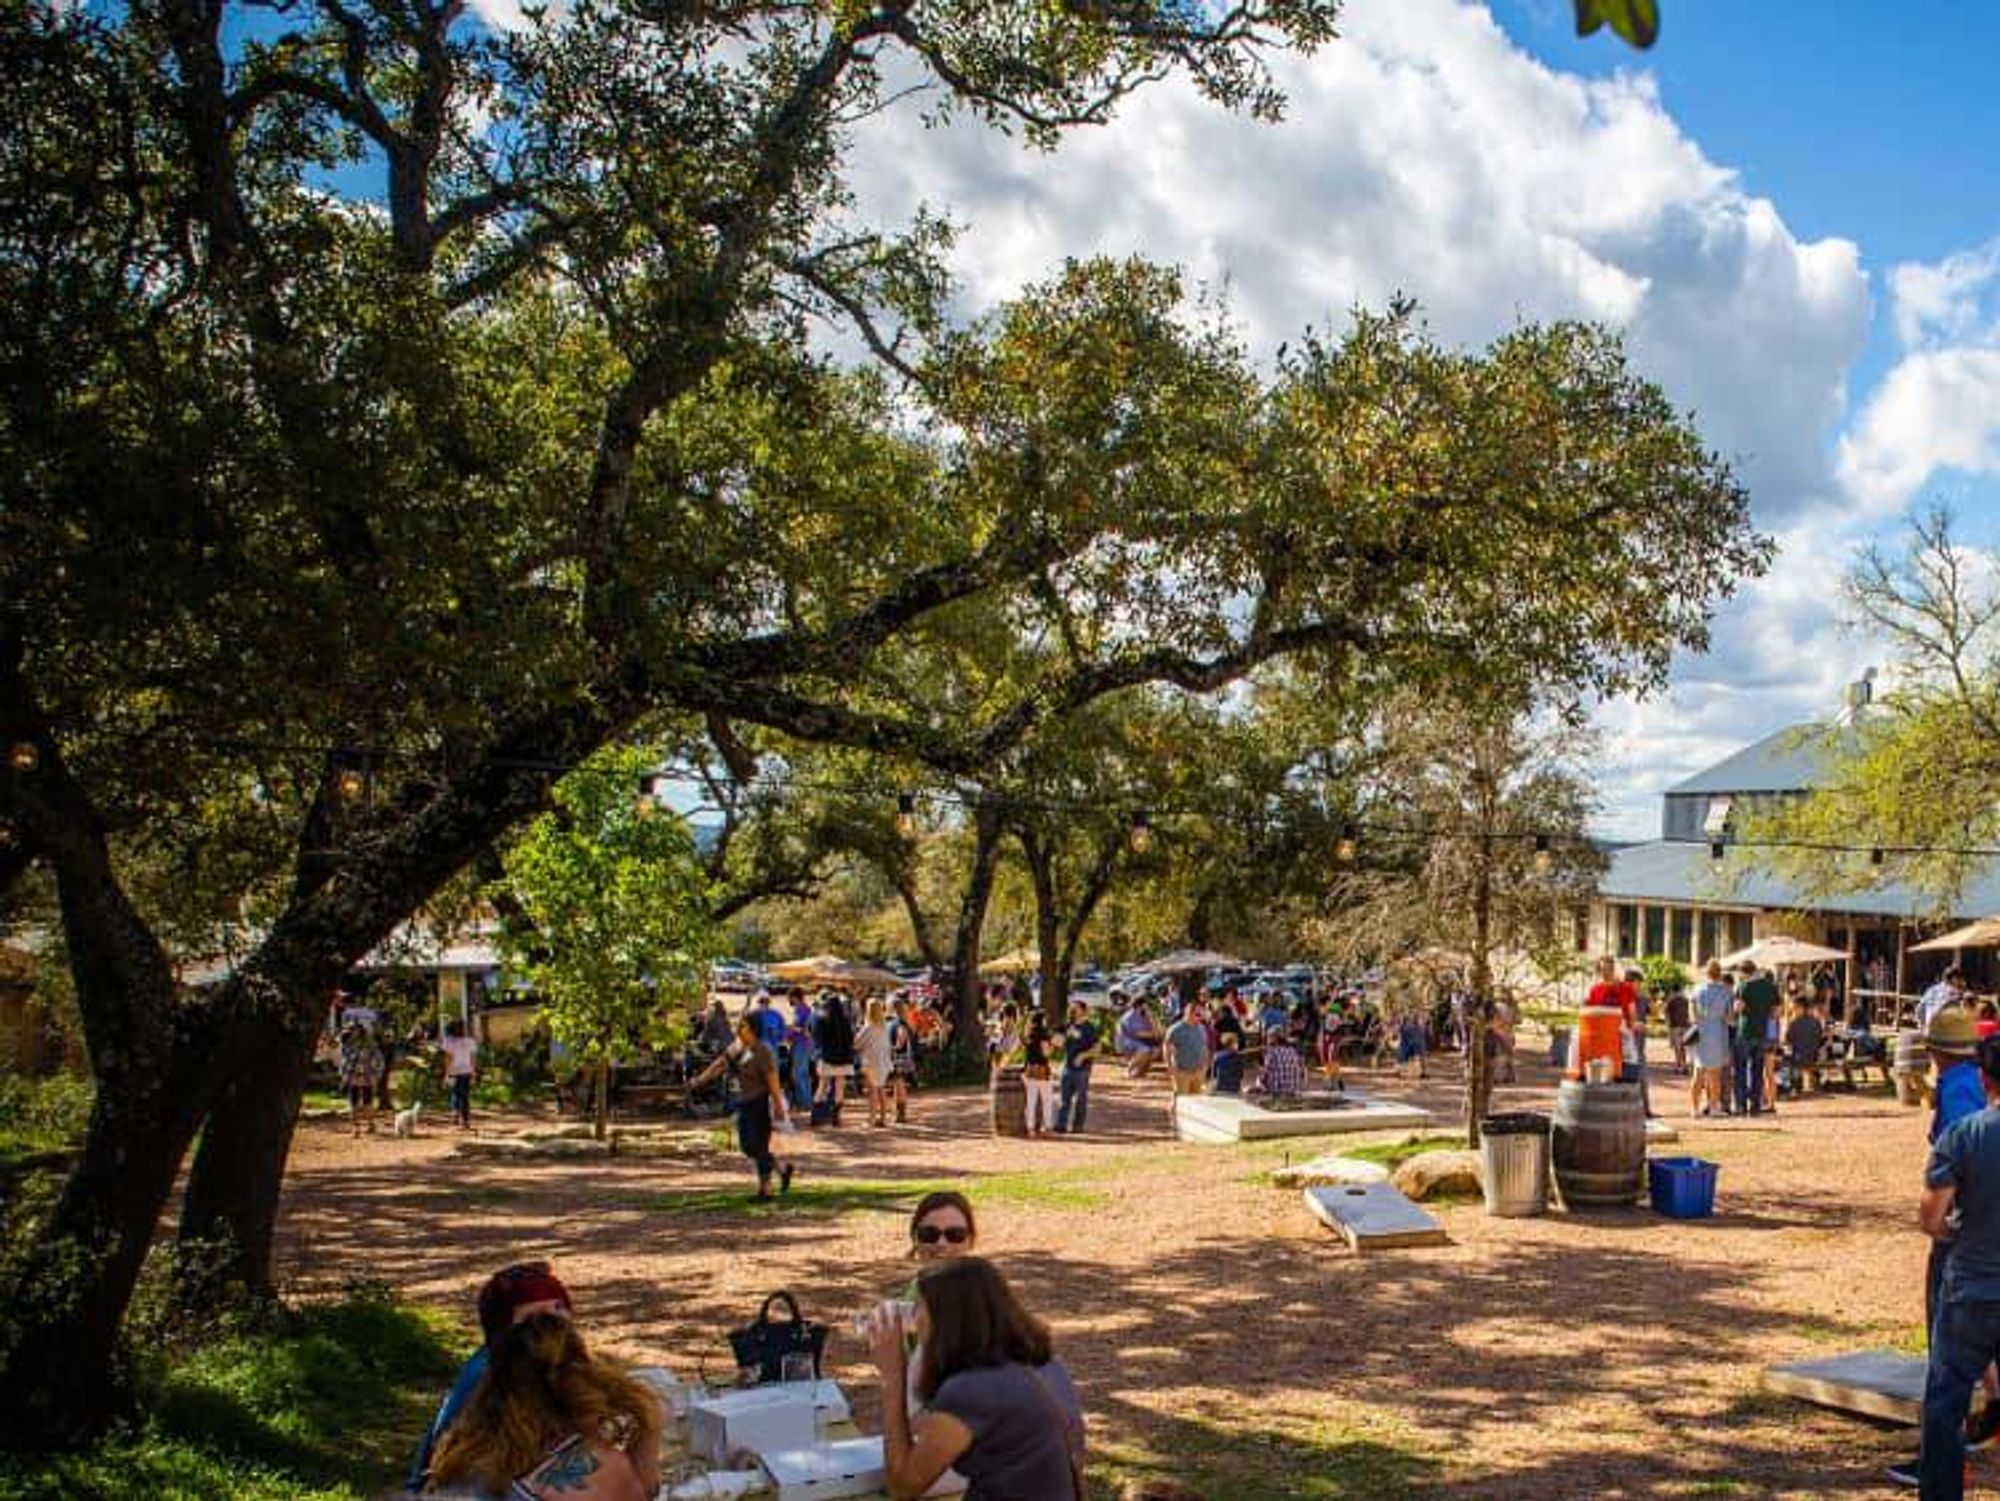 Jester King Brewery grounds